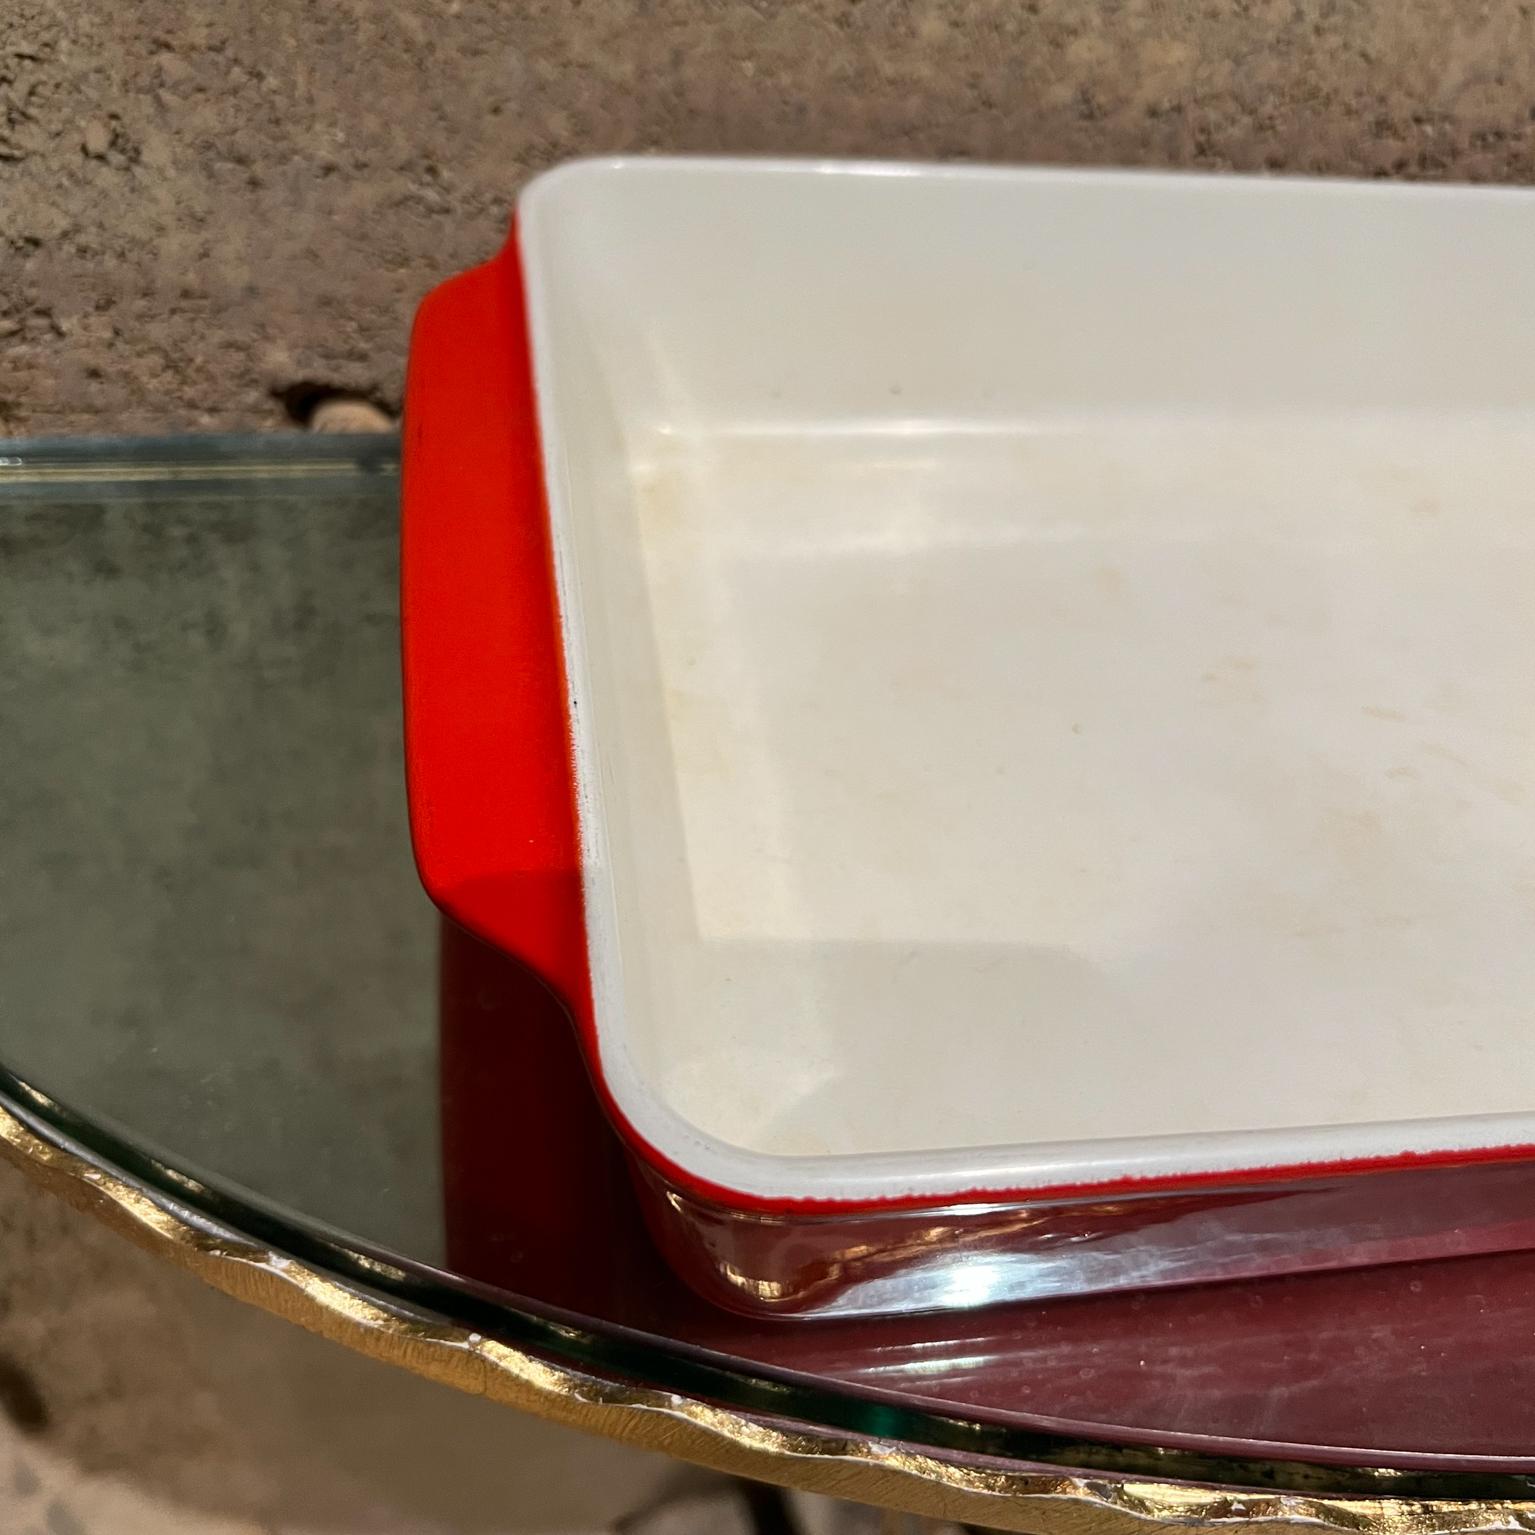 Mid-Century Modern 1960s Copco Red Enamelware Casserole Baking Dish Michael Lax Denmark For Sale